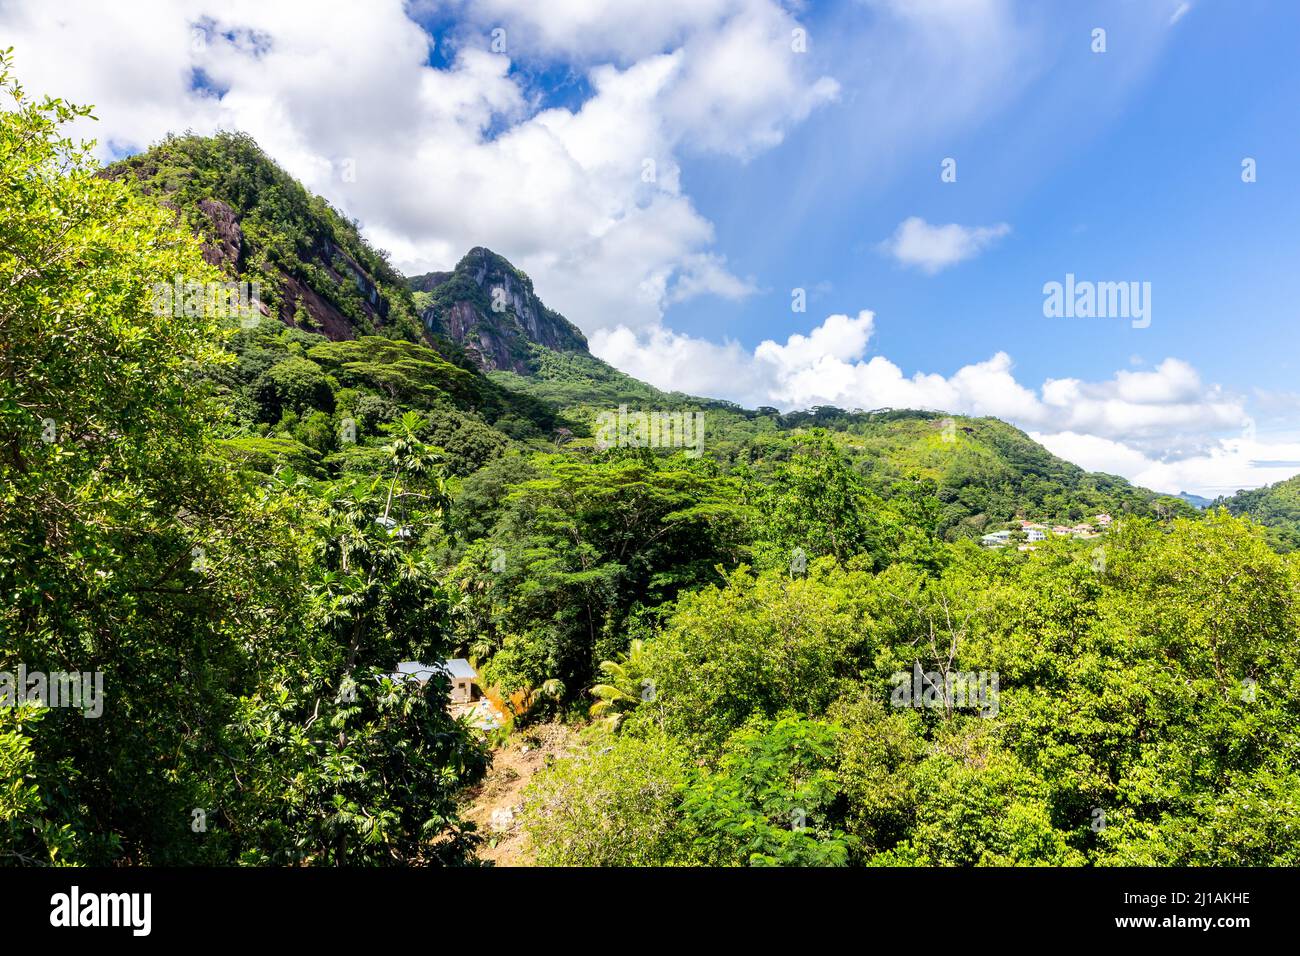 Mountain landscape of Mahe Island, Seychelles, with lush tropical vegetation, rainforest, palm trees, and Morne Blanc rocky peak in the distance. Stock Photo